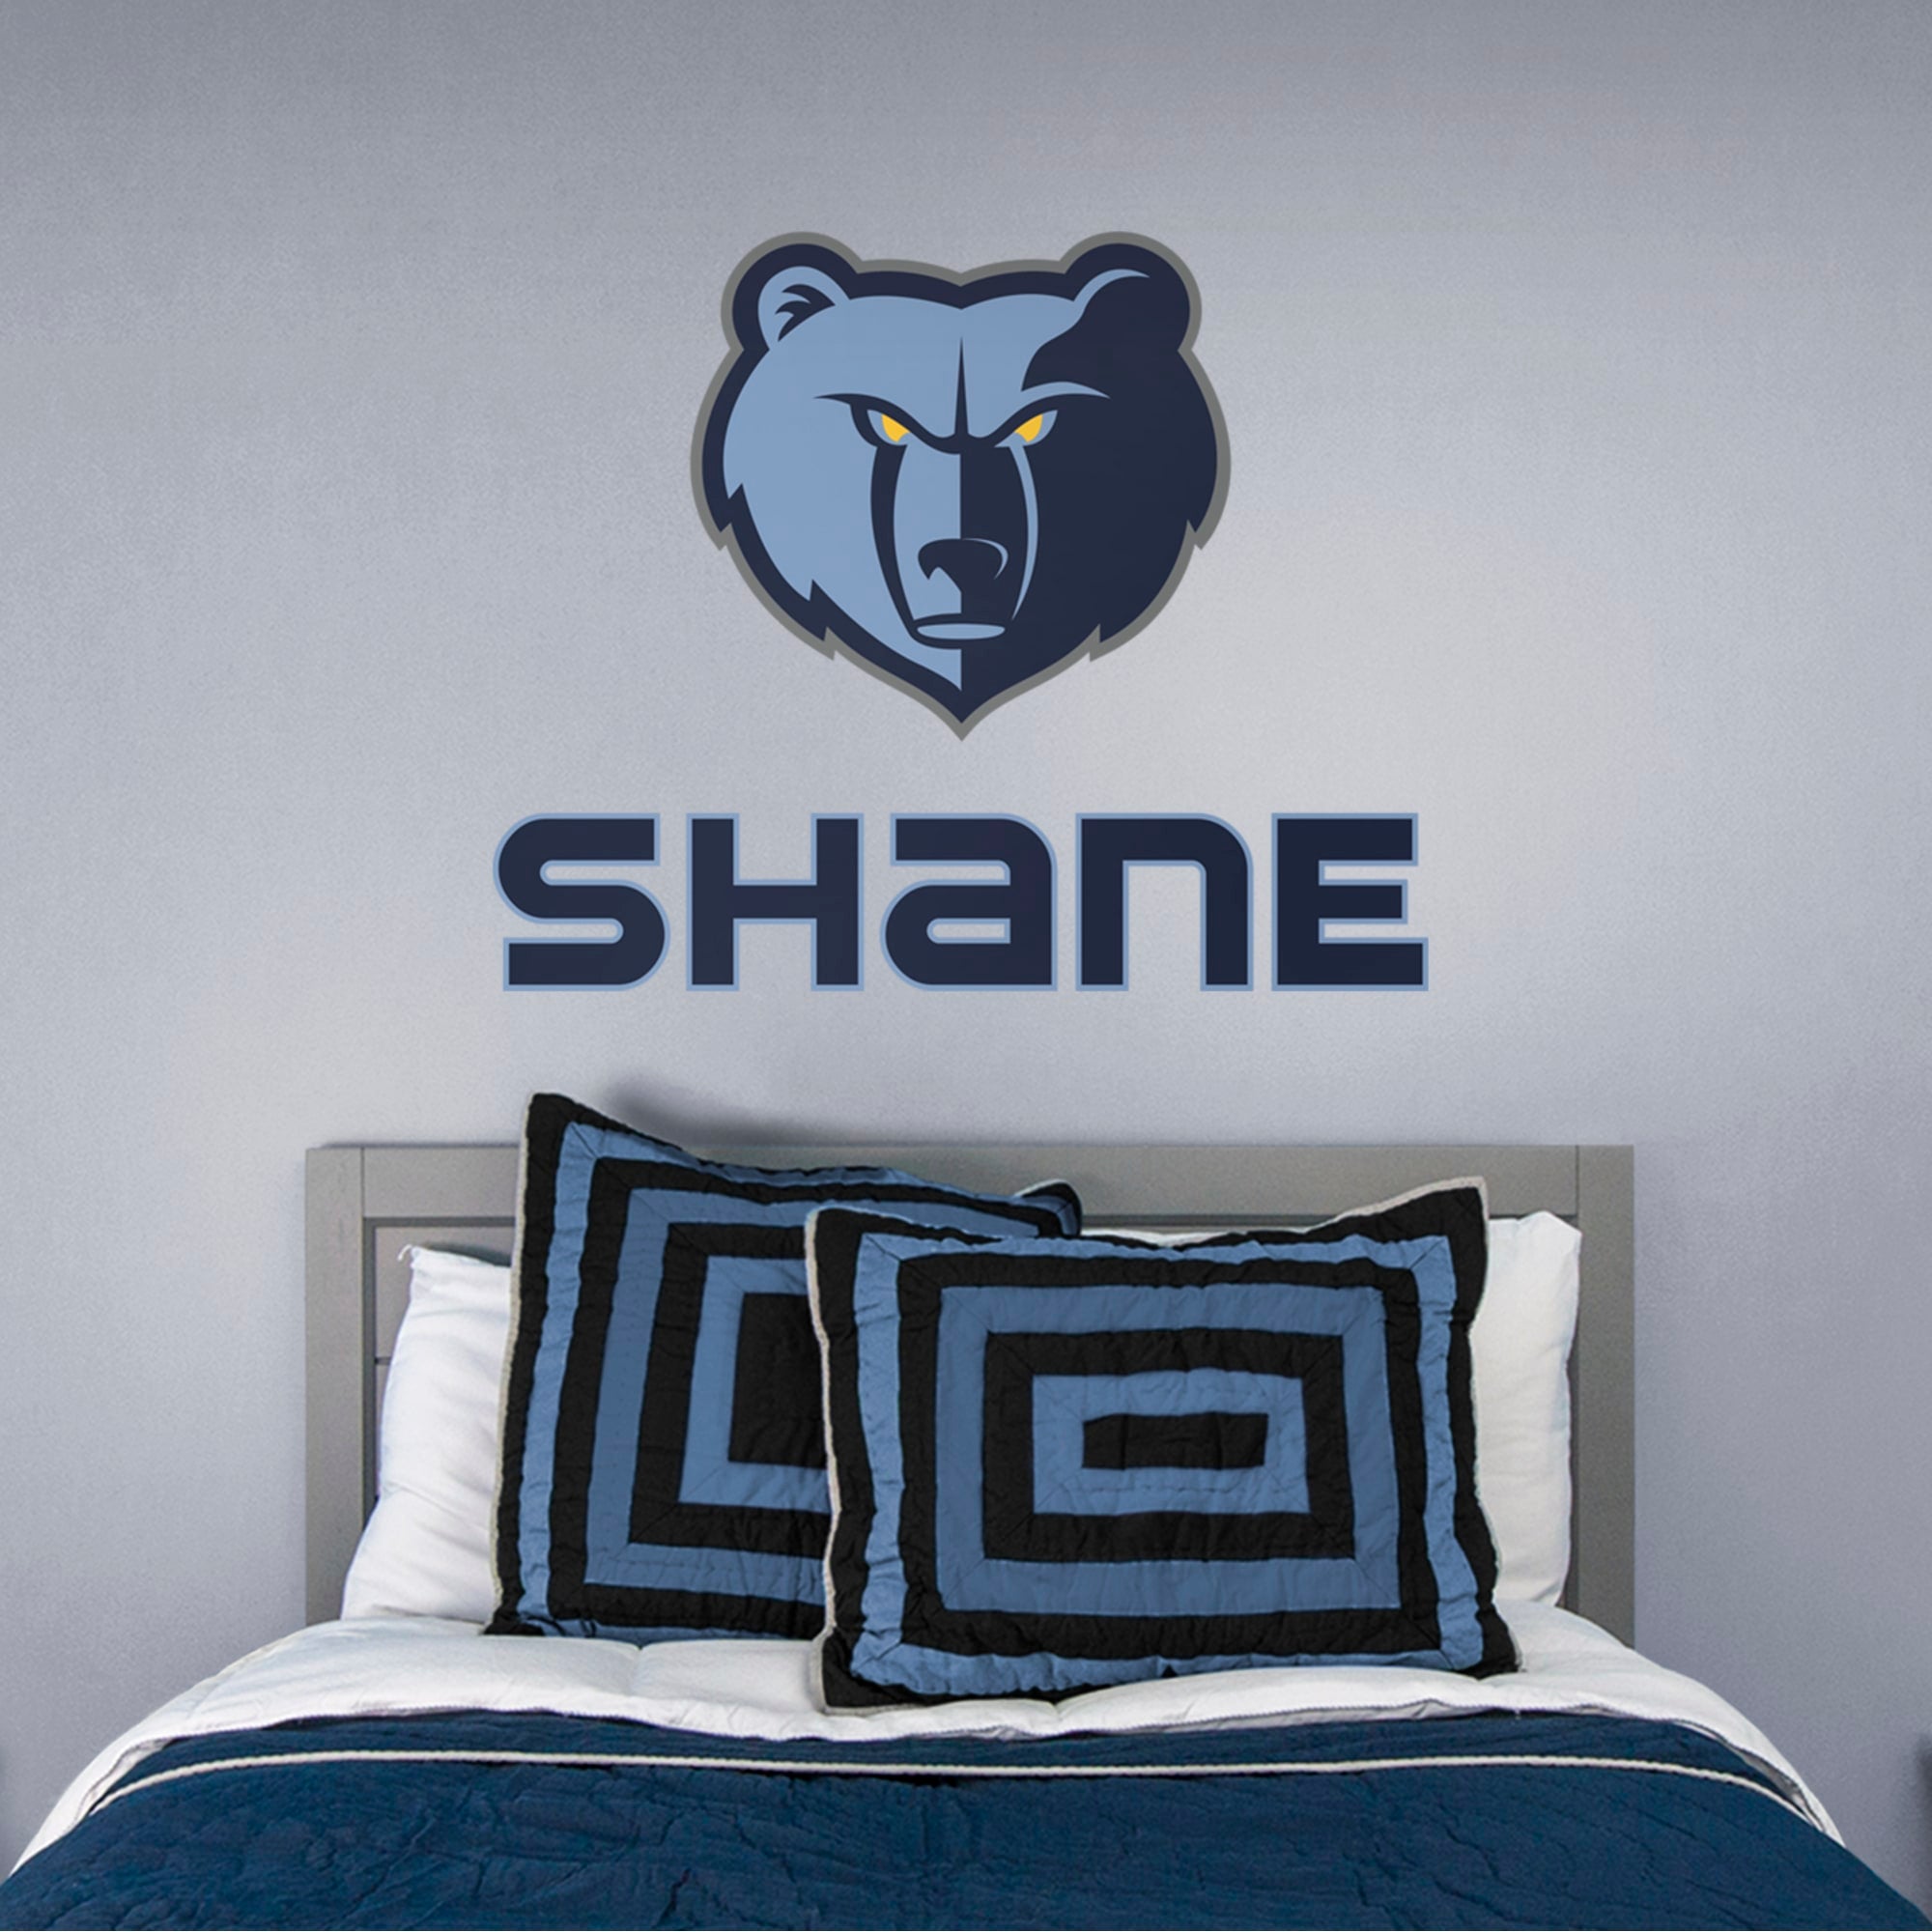 Memphis Grizzlies: Stacked Personalized Name - Officially Licensed NBA Transfer Decal in Navy (52"W x 39.5"H) by Fathead | Vinyl